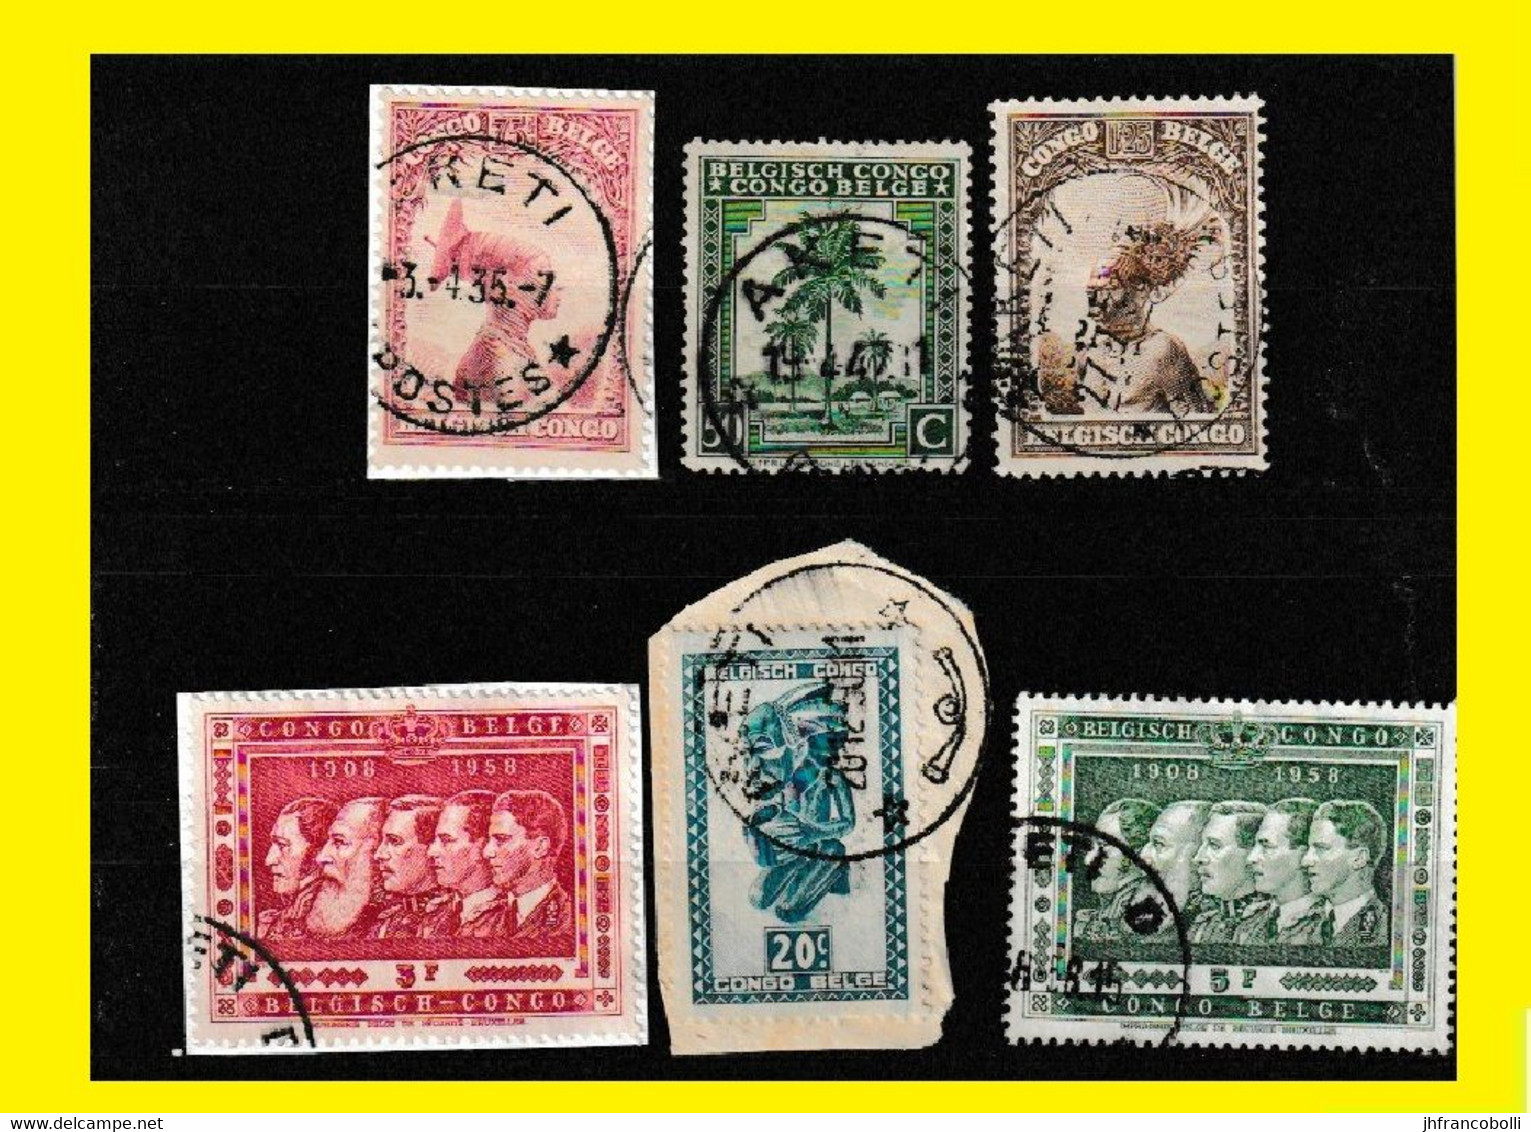 (°) AKETI BELGIAN CONGO / CONGO BELGE CANCEL STUDY [L] WITH 6 DIFFERENT STAMPS 1931/1958 PERIOD - Variedades Y Curiosidades